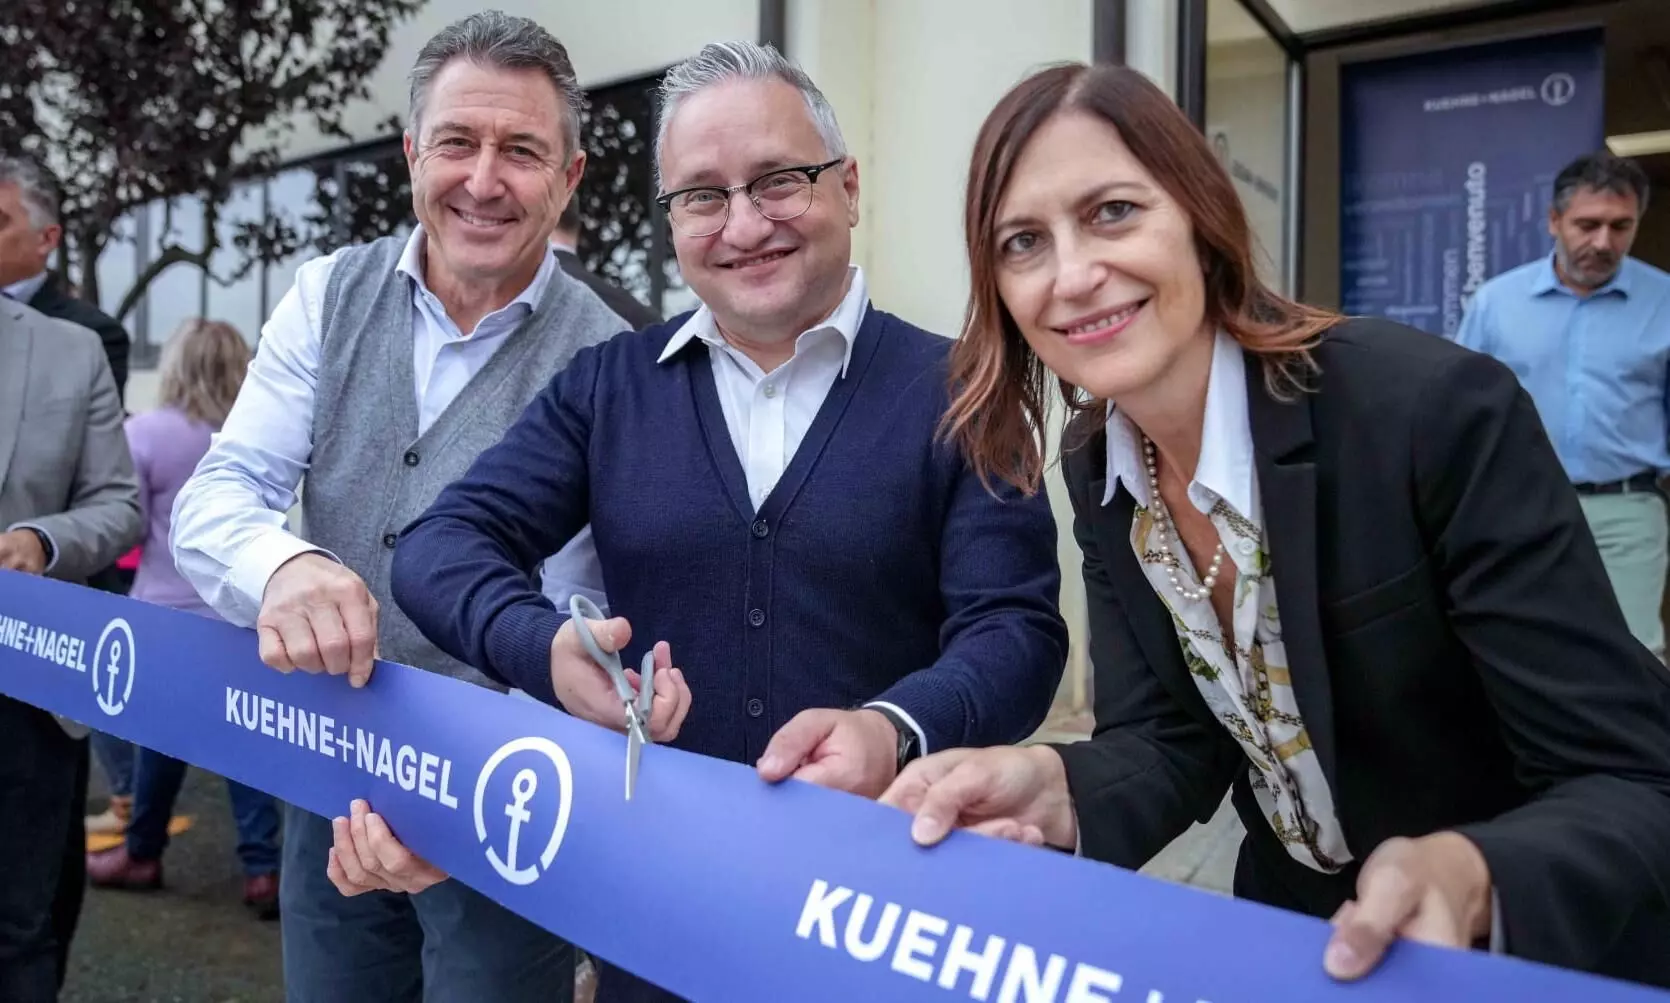 Kuehne+Nagel opens new depot in Turin to strengthen Groupage network